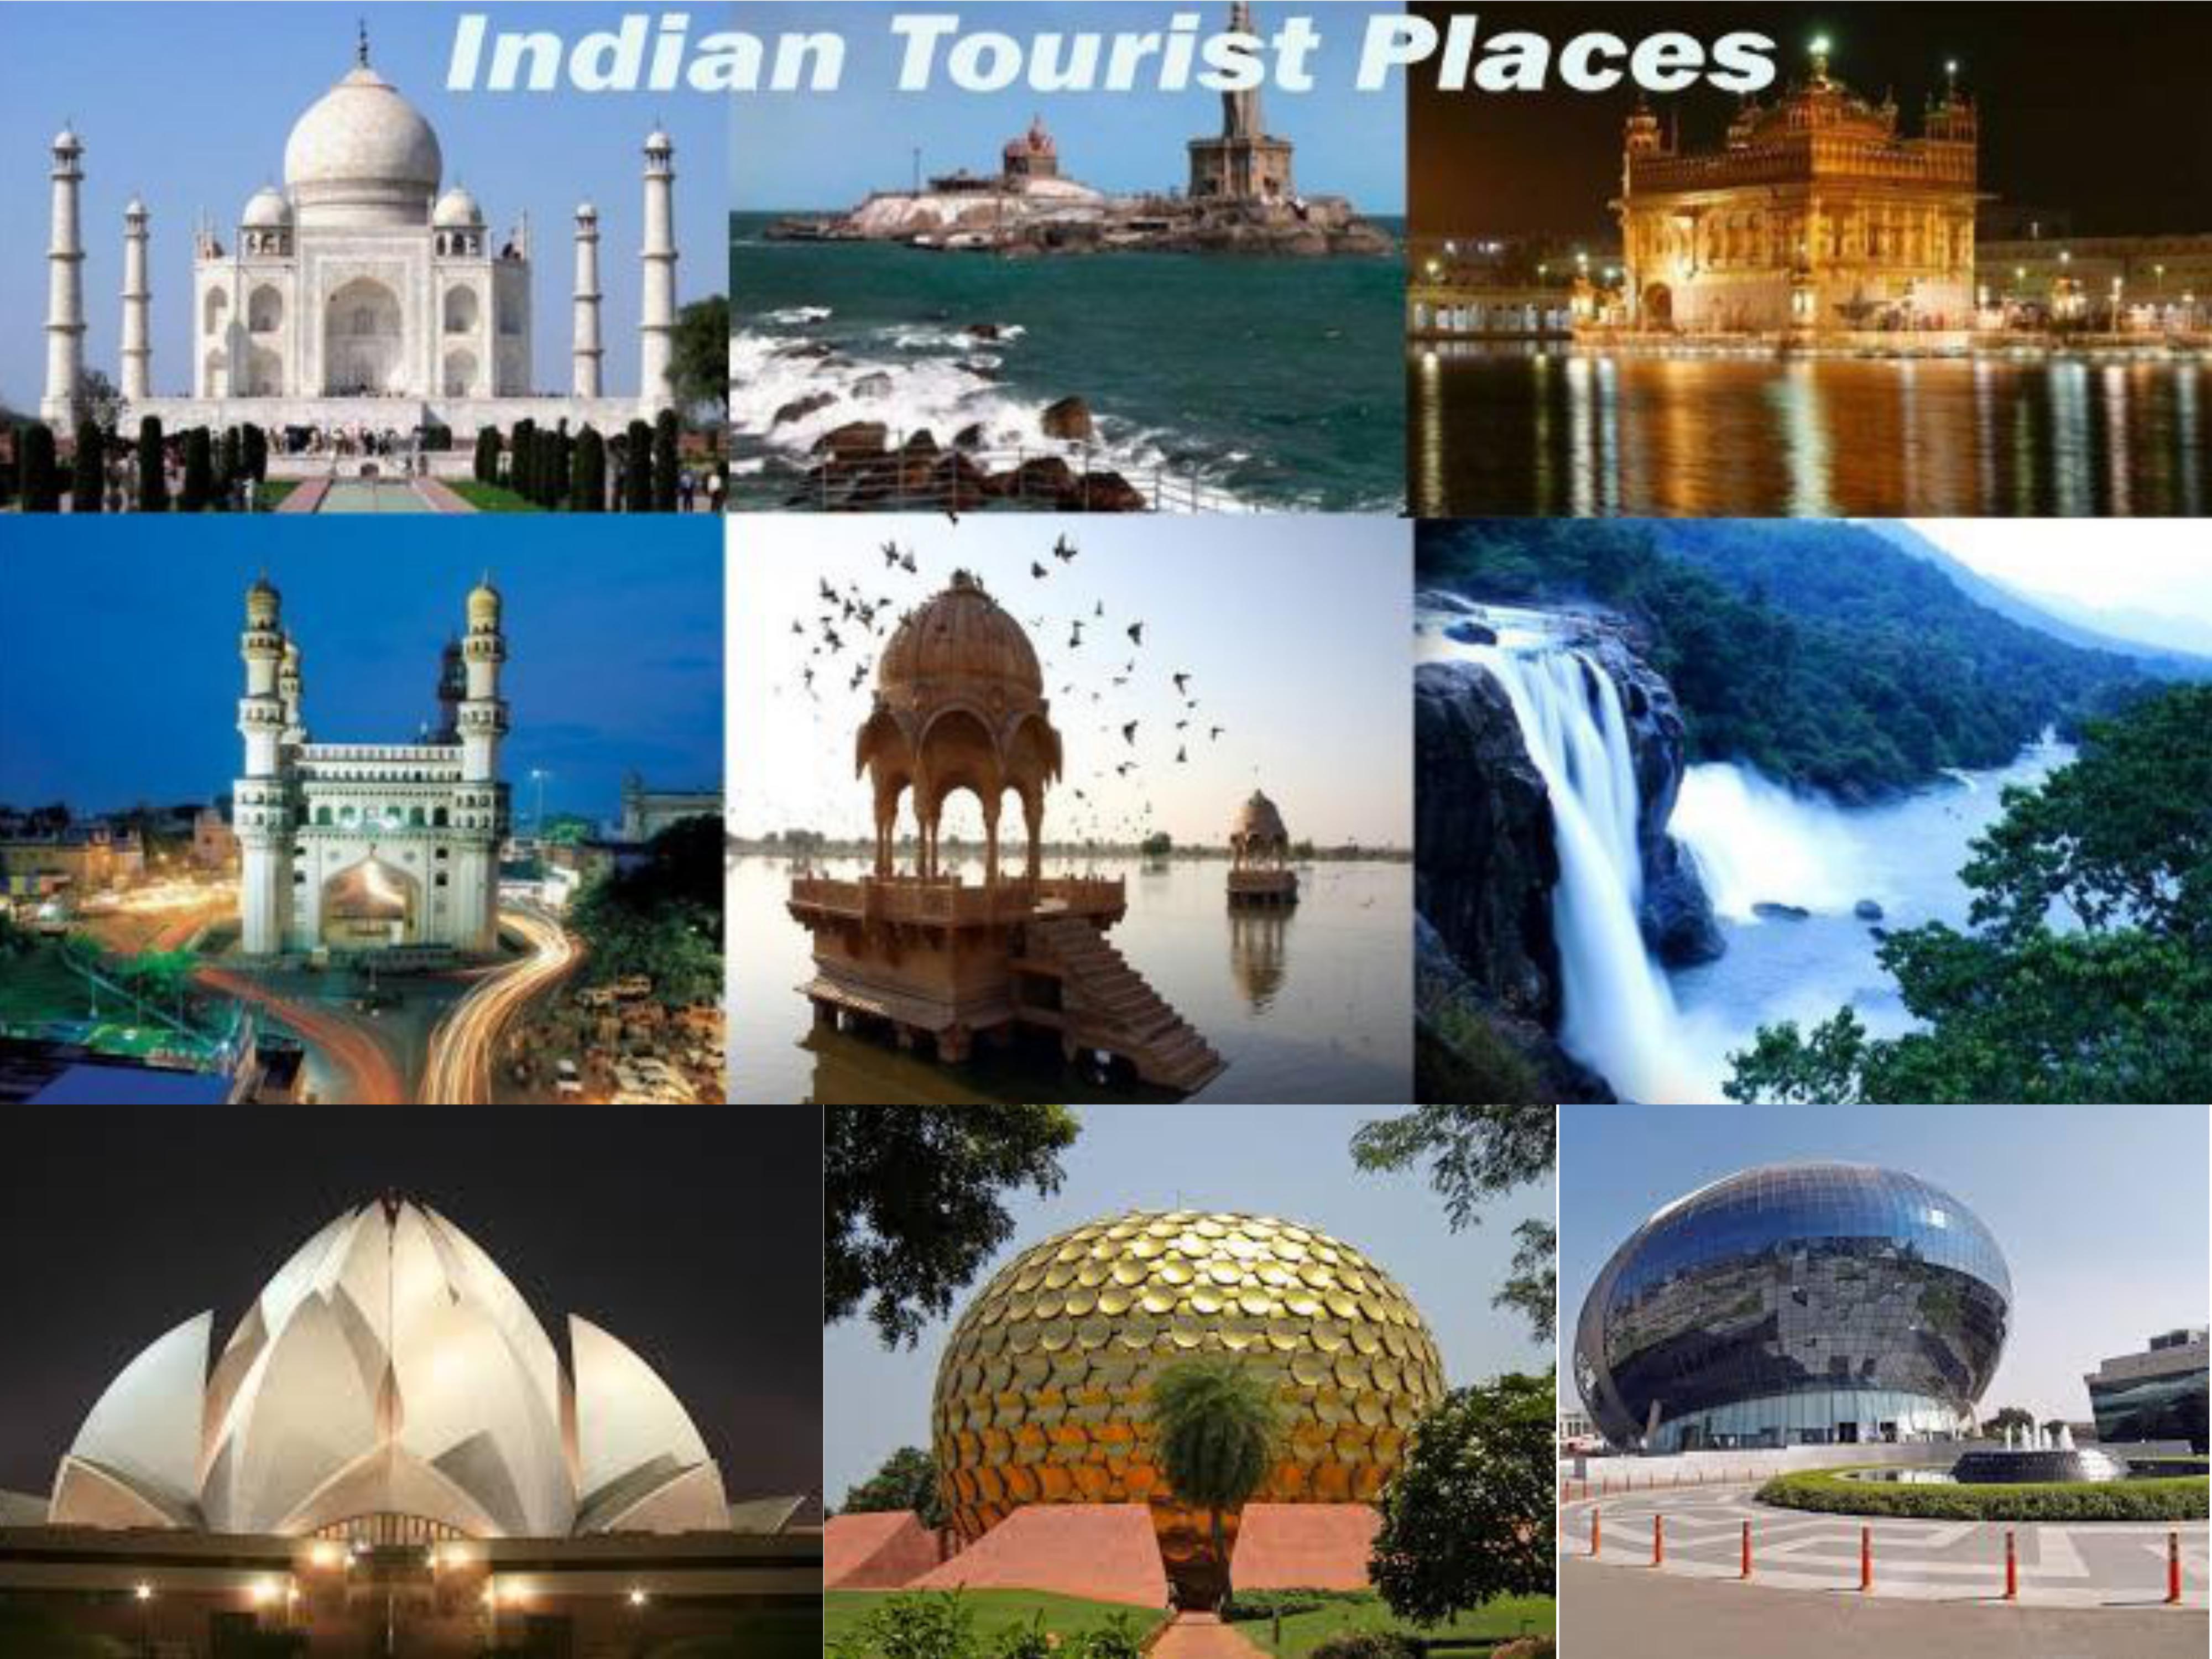 Some Famous Tourist Destinations in India